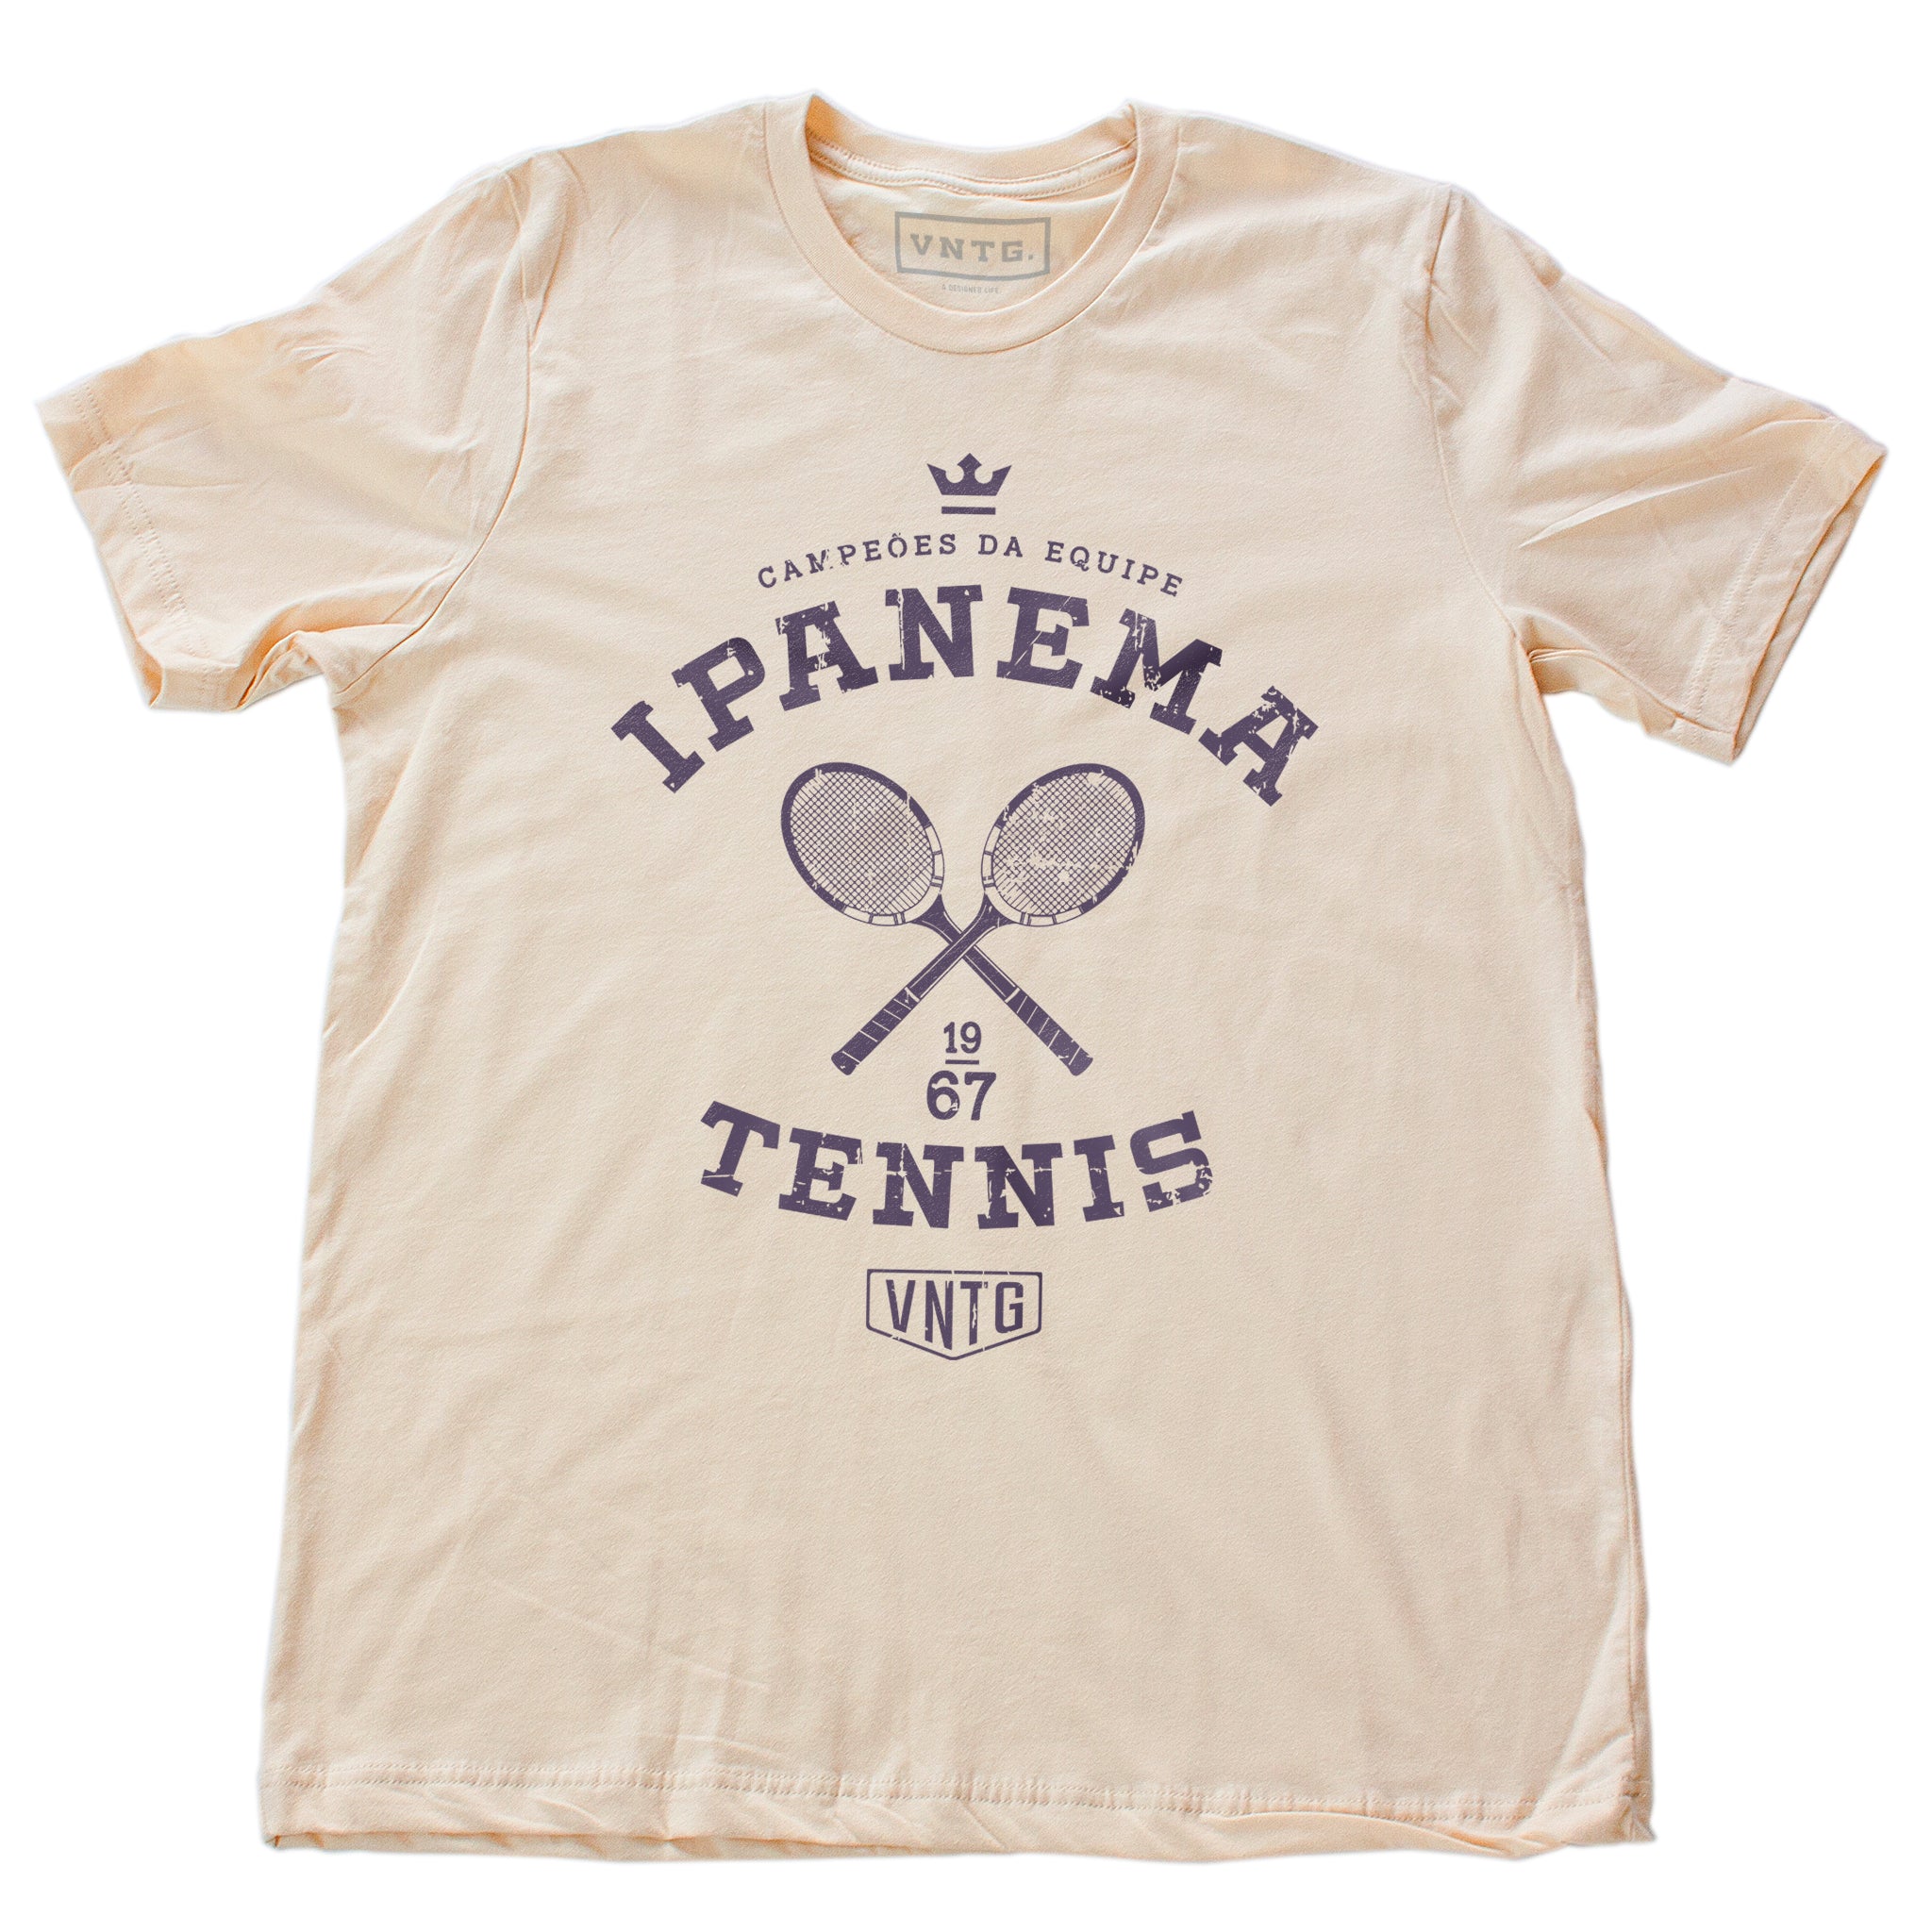 Vintage-inspired, retro graphic sports t-shirt in Soft Cream, as a ‘team’ shirt for a fictitious tennis team championship in Ipanema, Rio de Janeiro, Brazil. By fashion brand VNTG., from wolfsaint.net